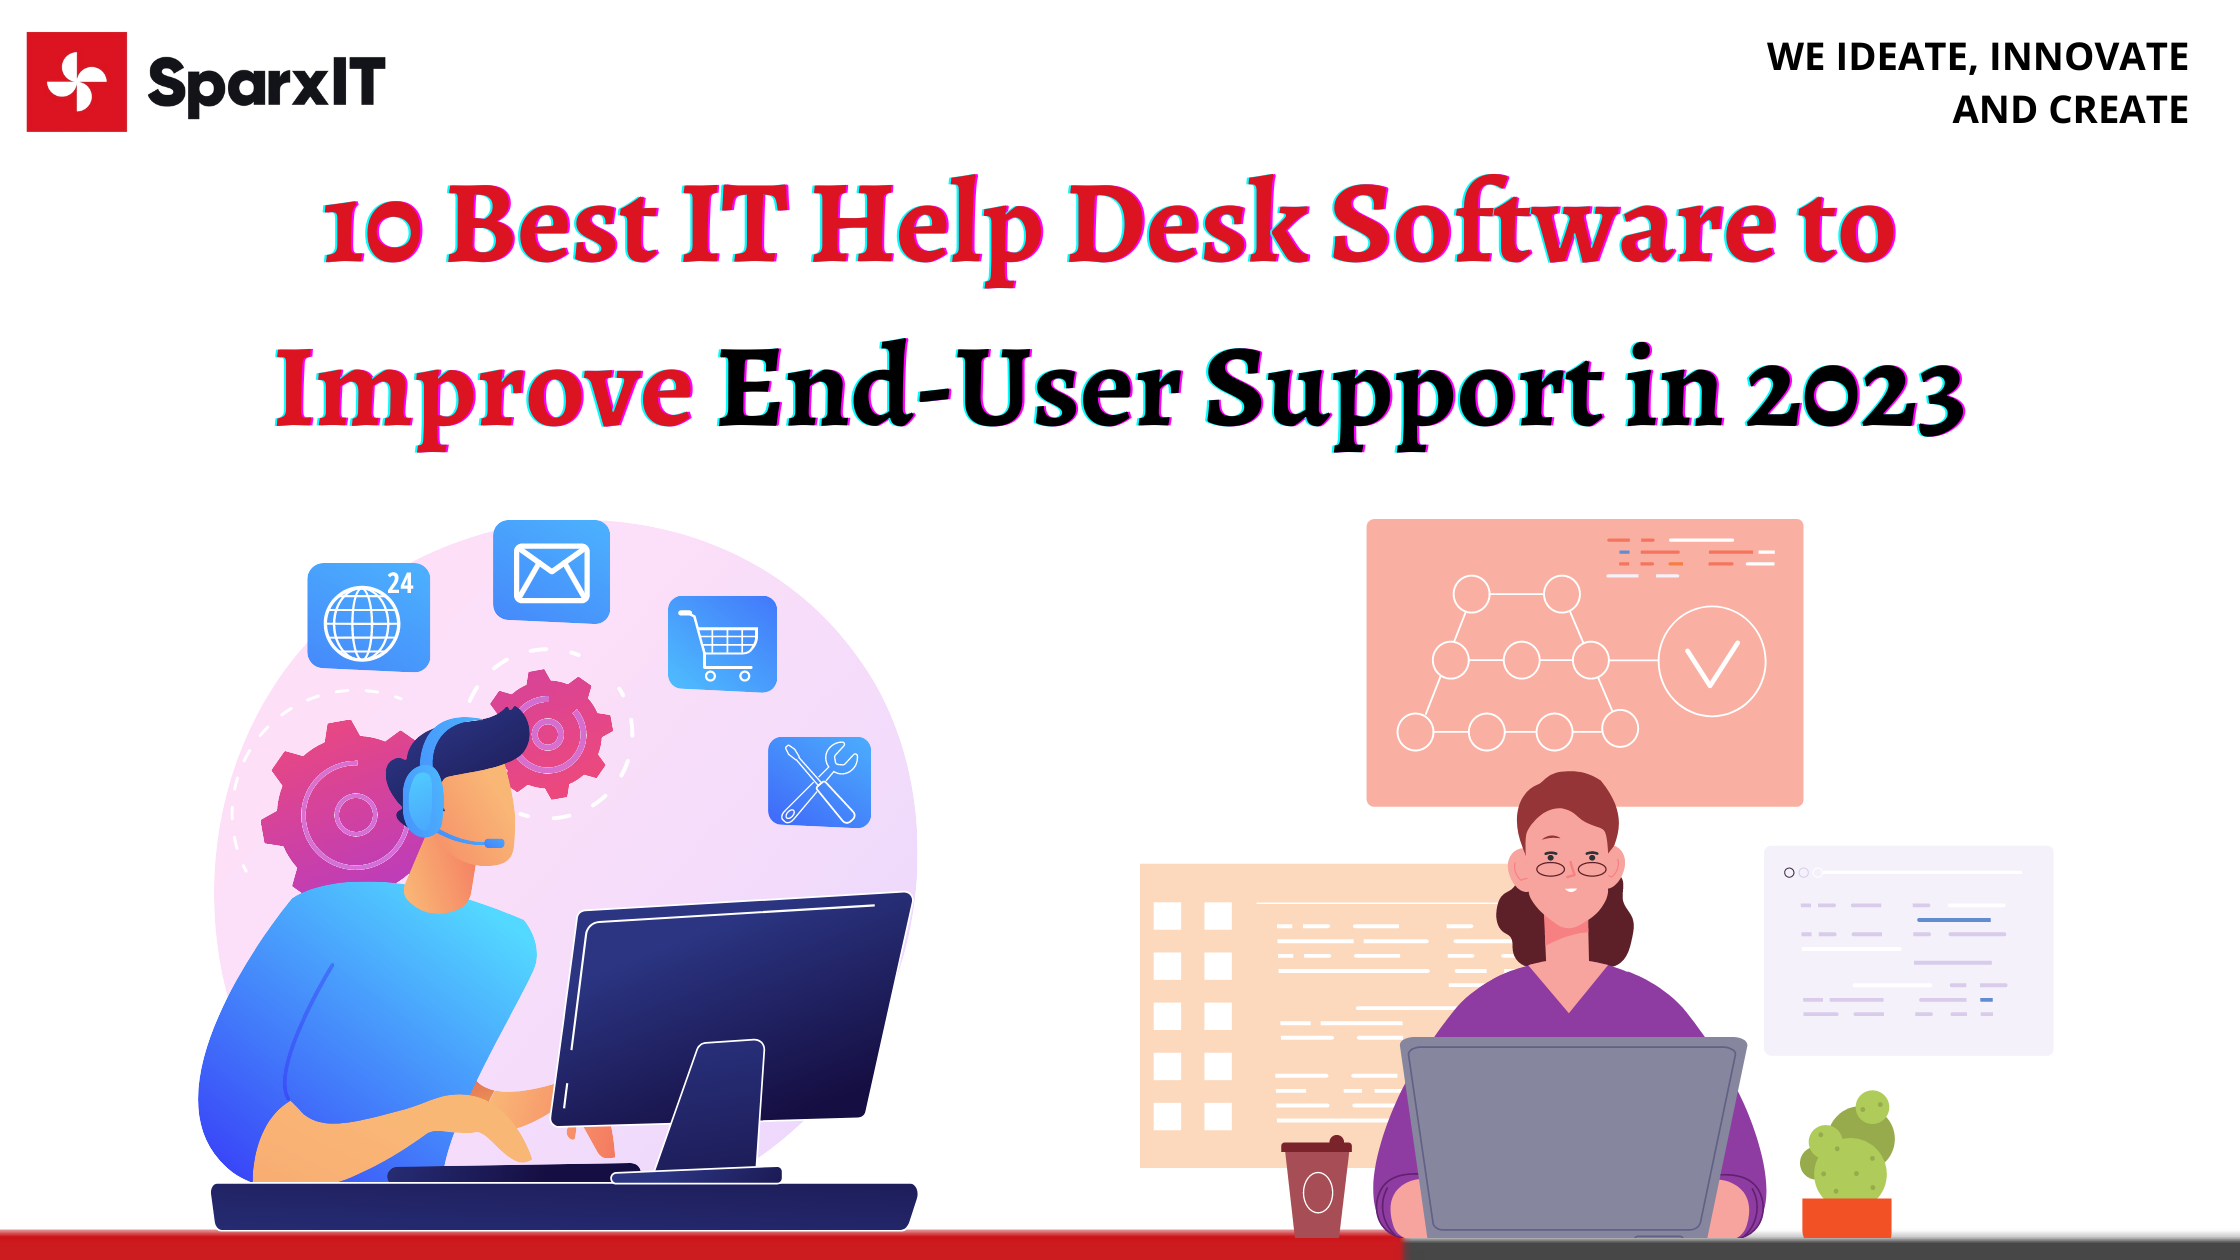 10 Best IT Help Desk Software to Improve End-User Support in 2023